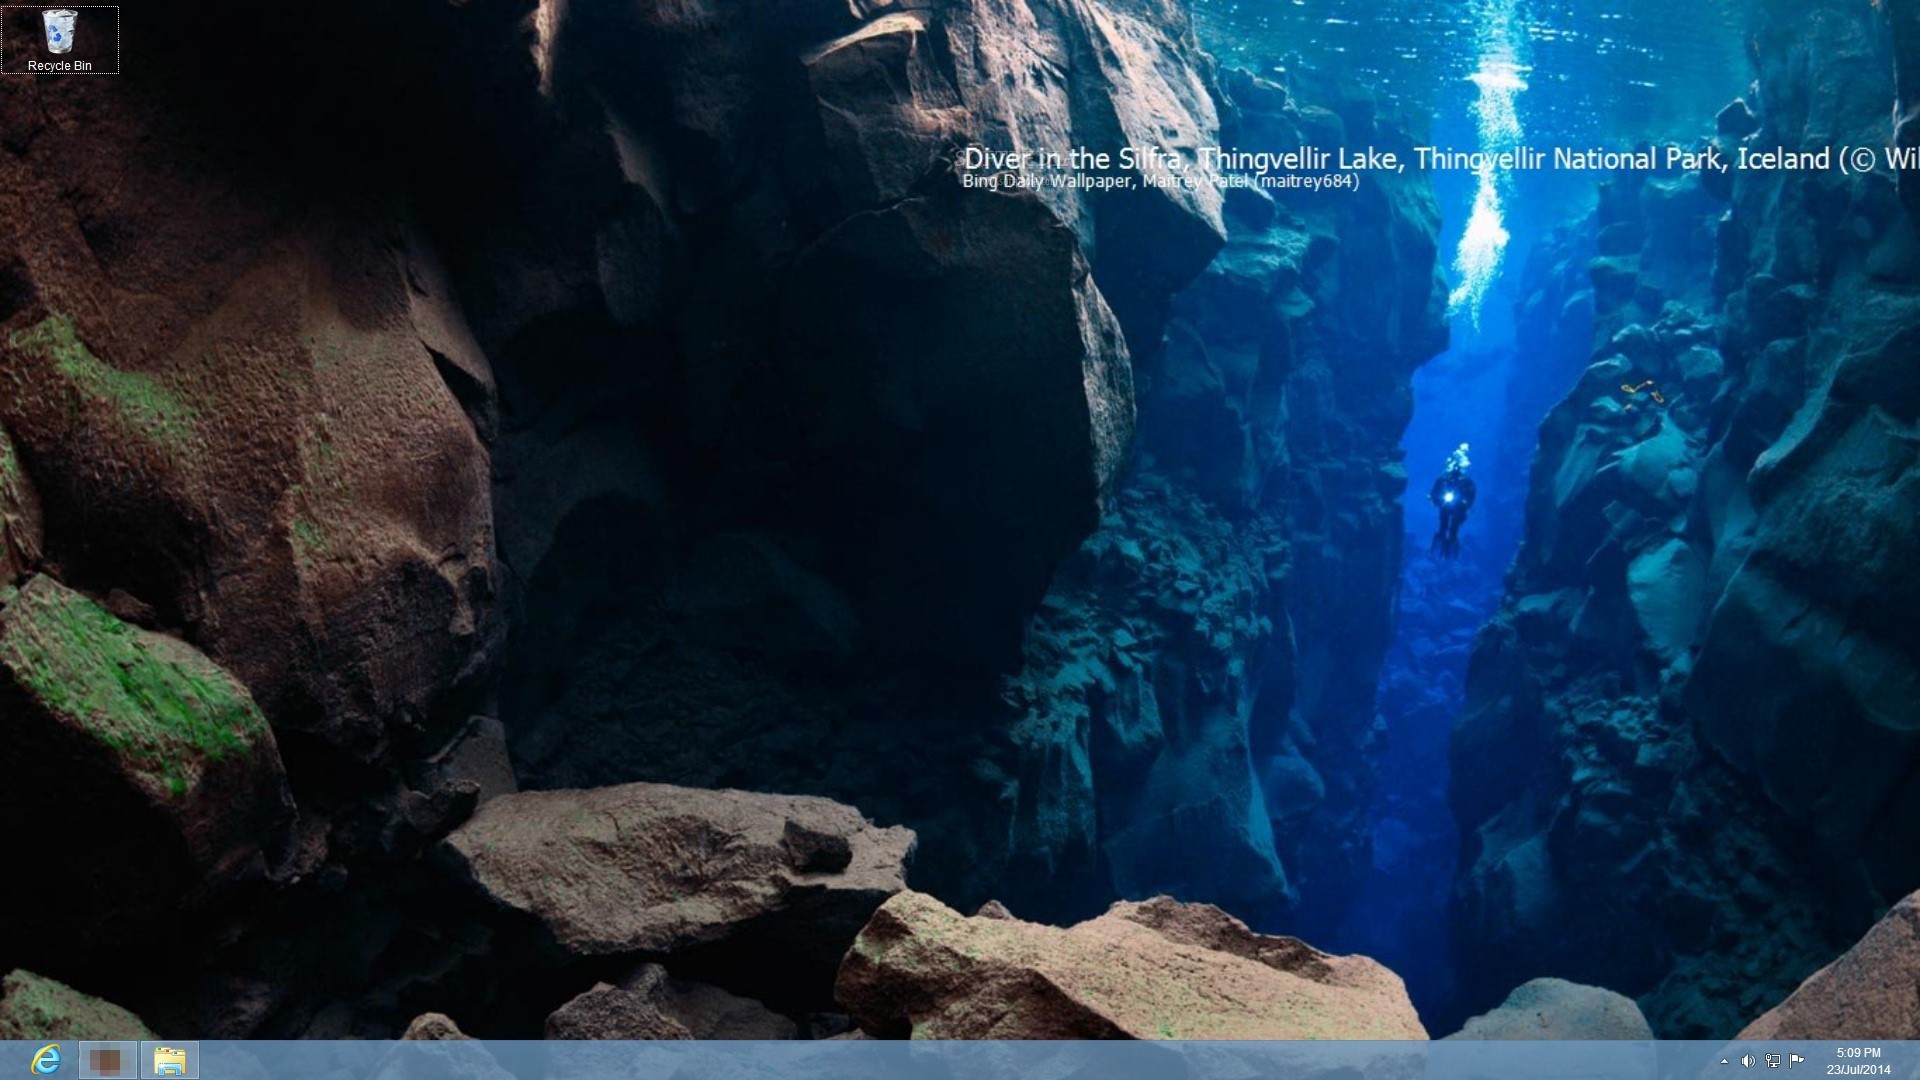 Bing Daily Wallpaper Windows For Your